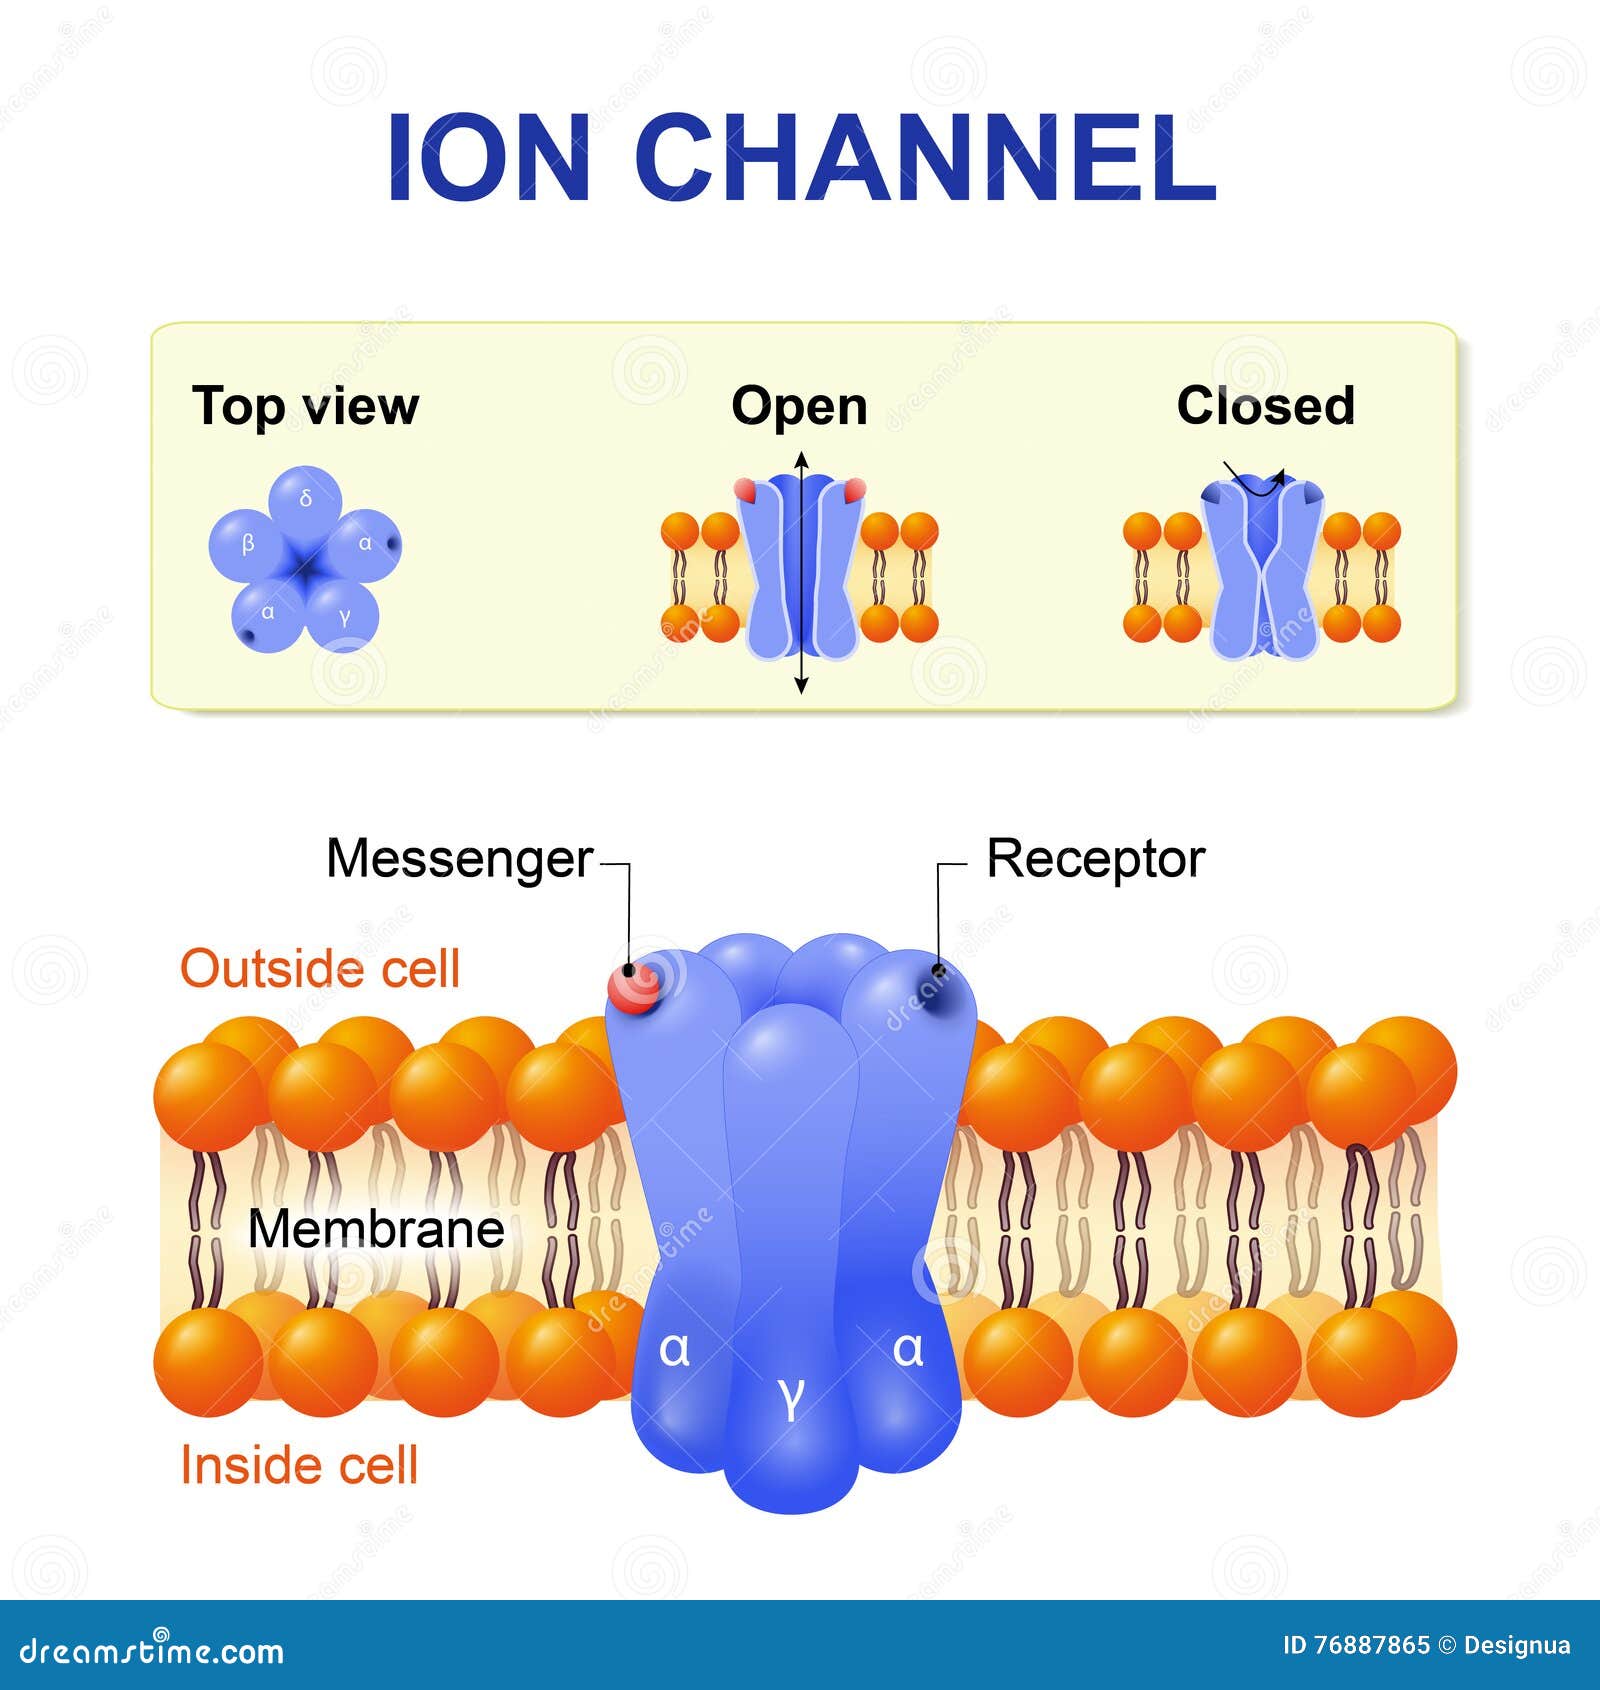 ion channel